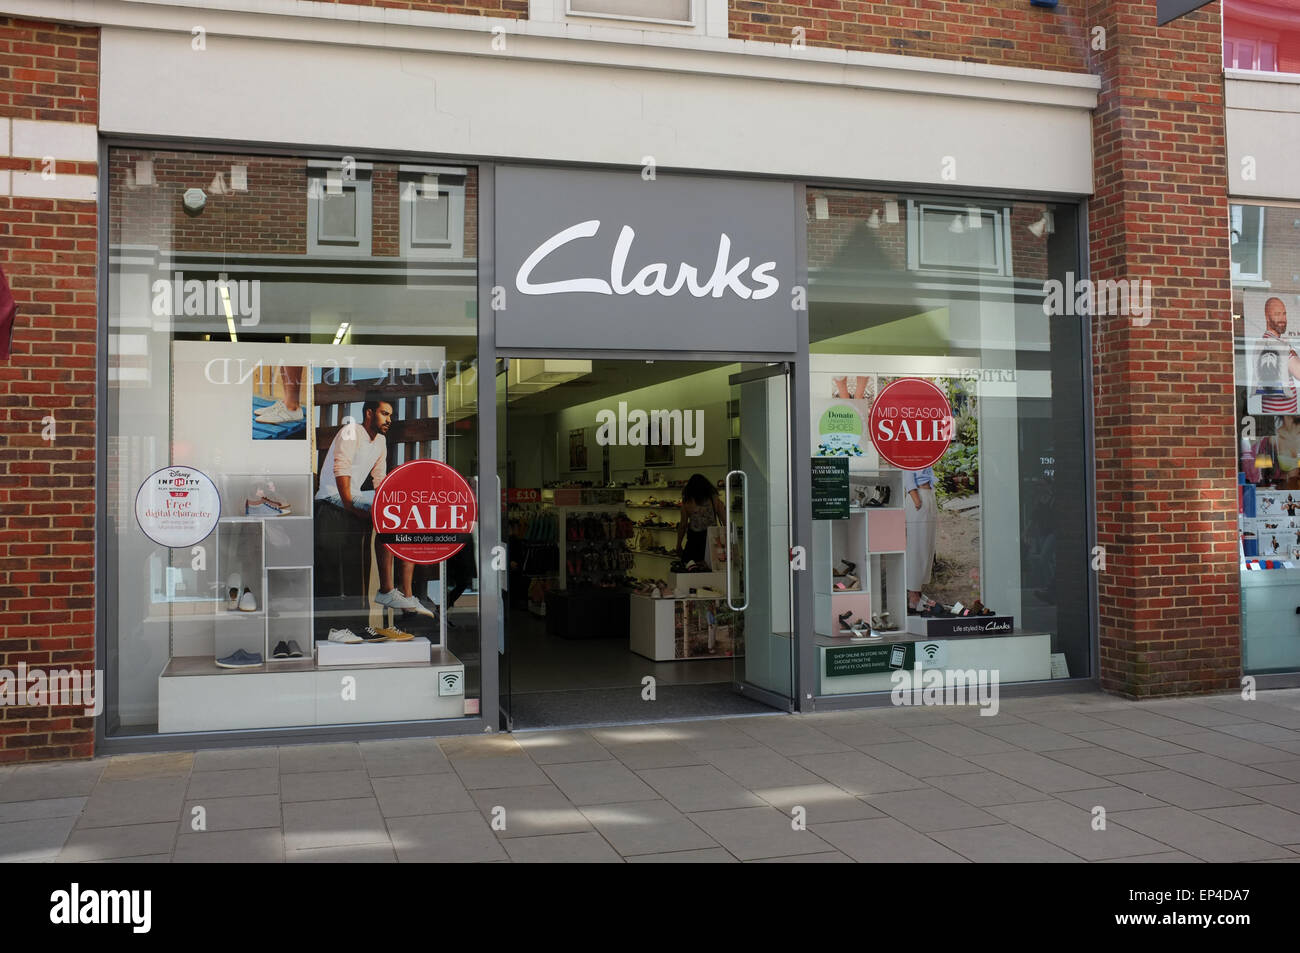 clarks shoes chichester